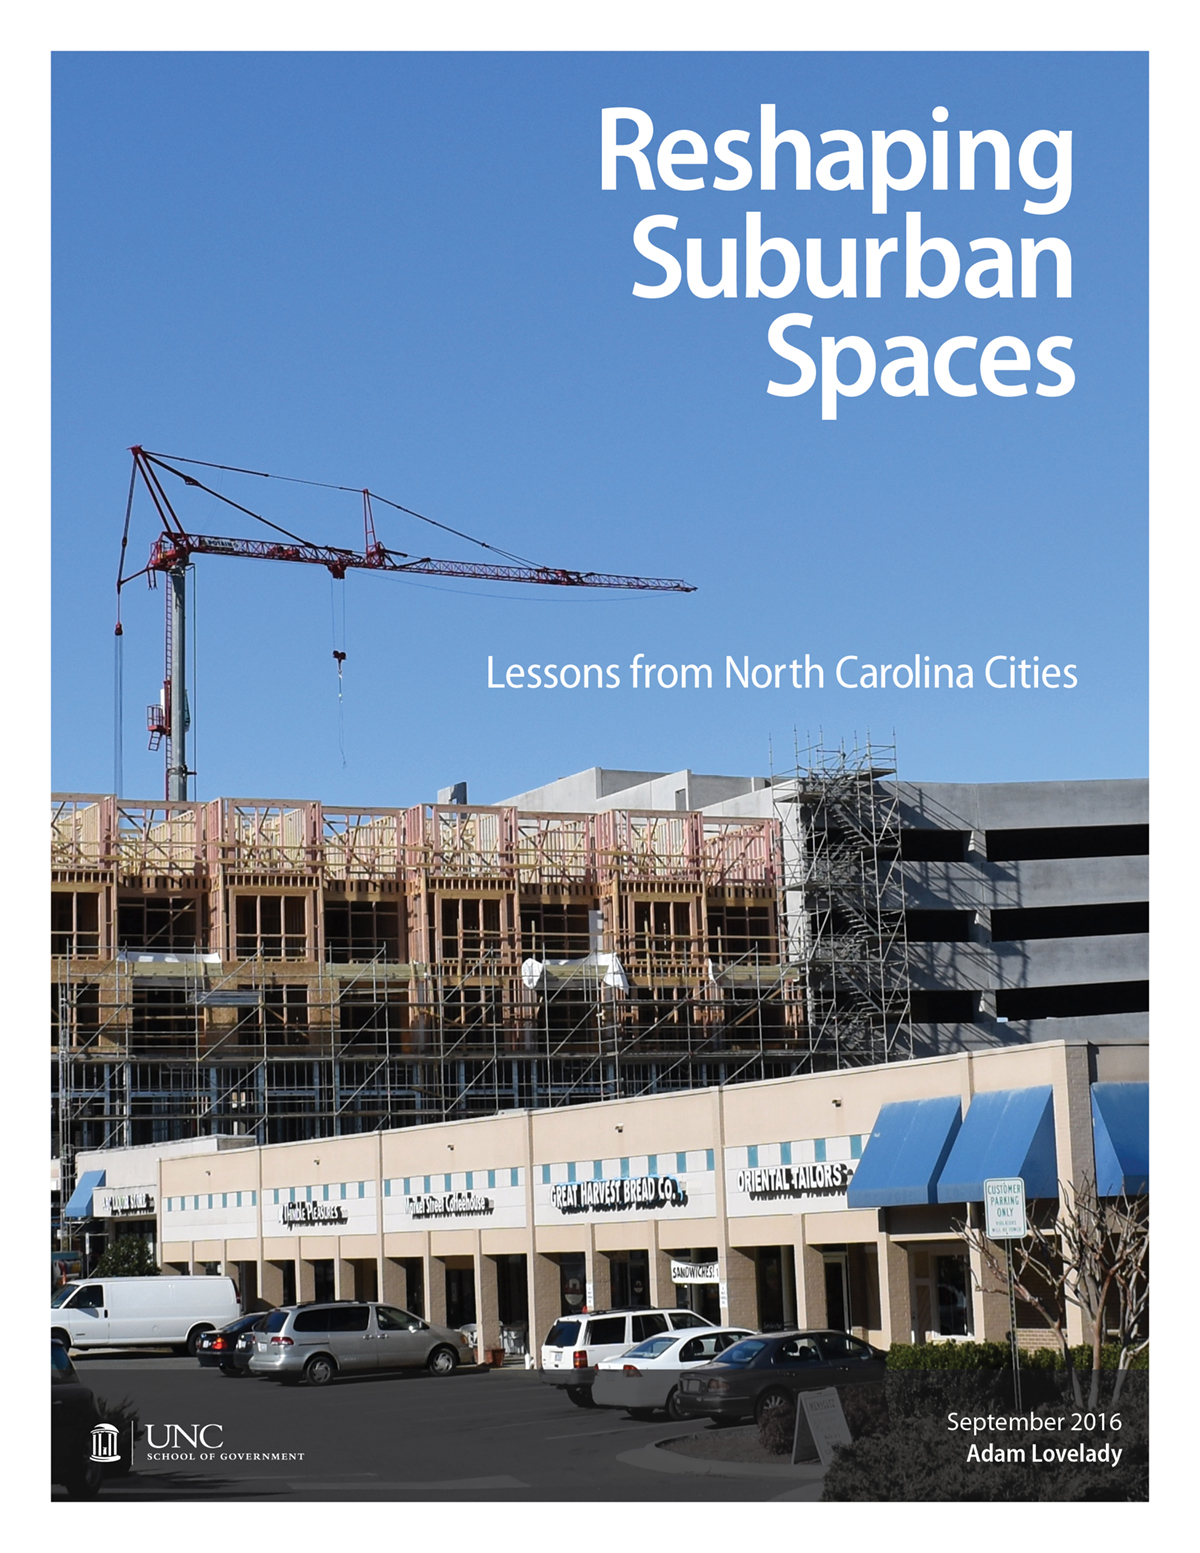 Reshaping Suburban Spaces: Lessons from North Carolina Cities